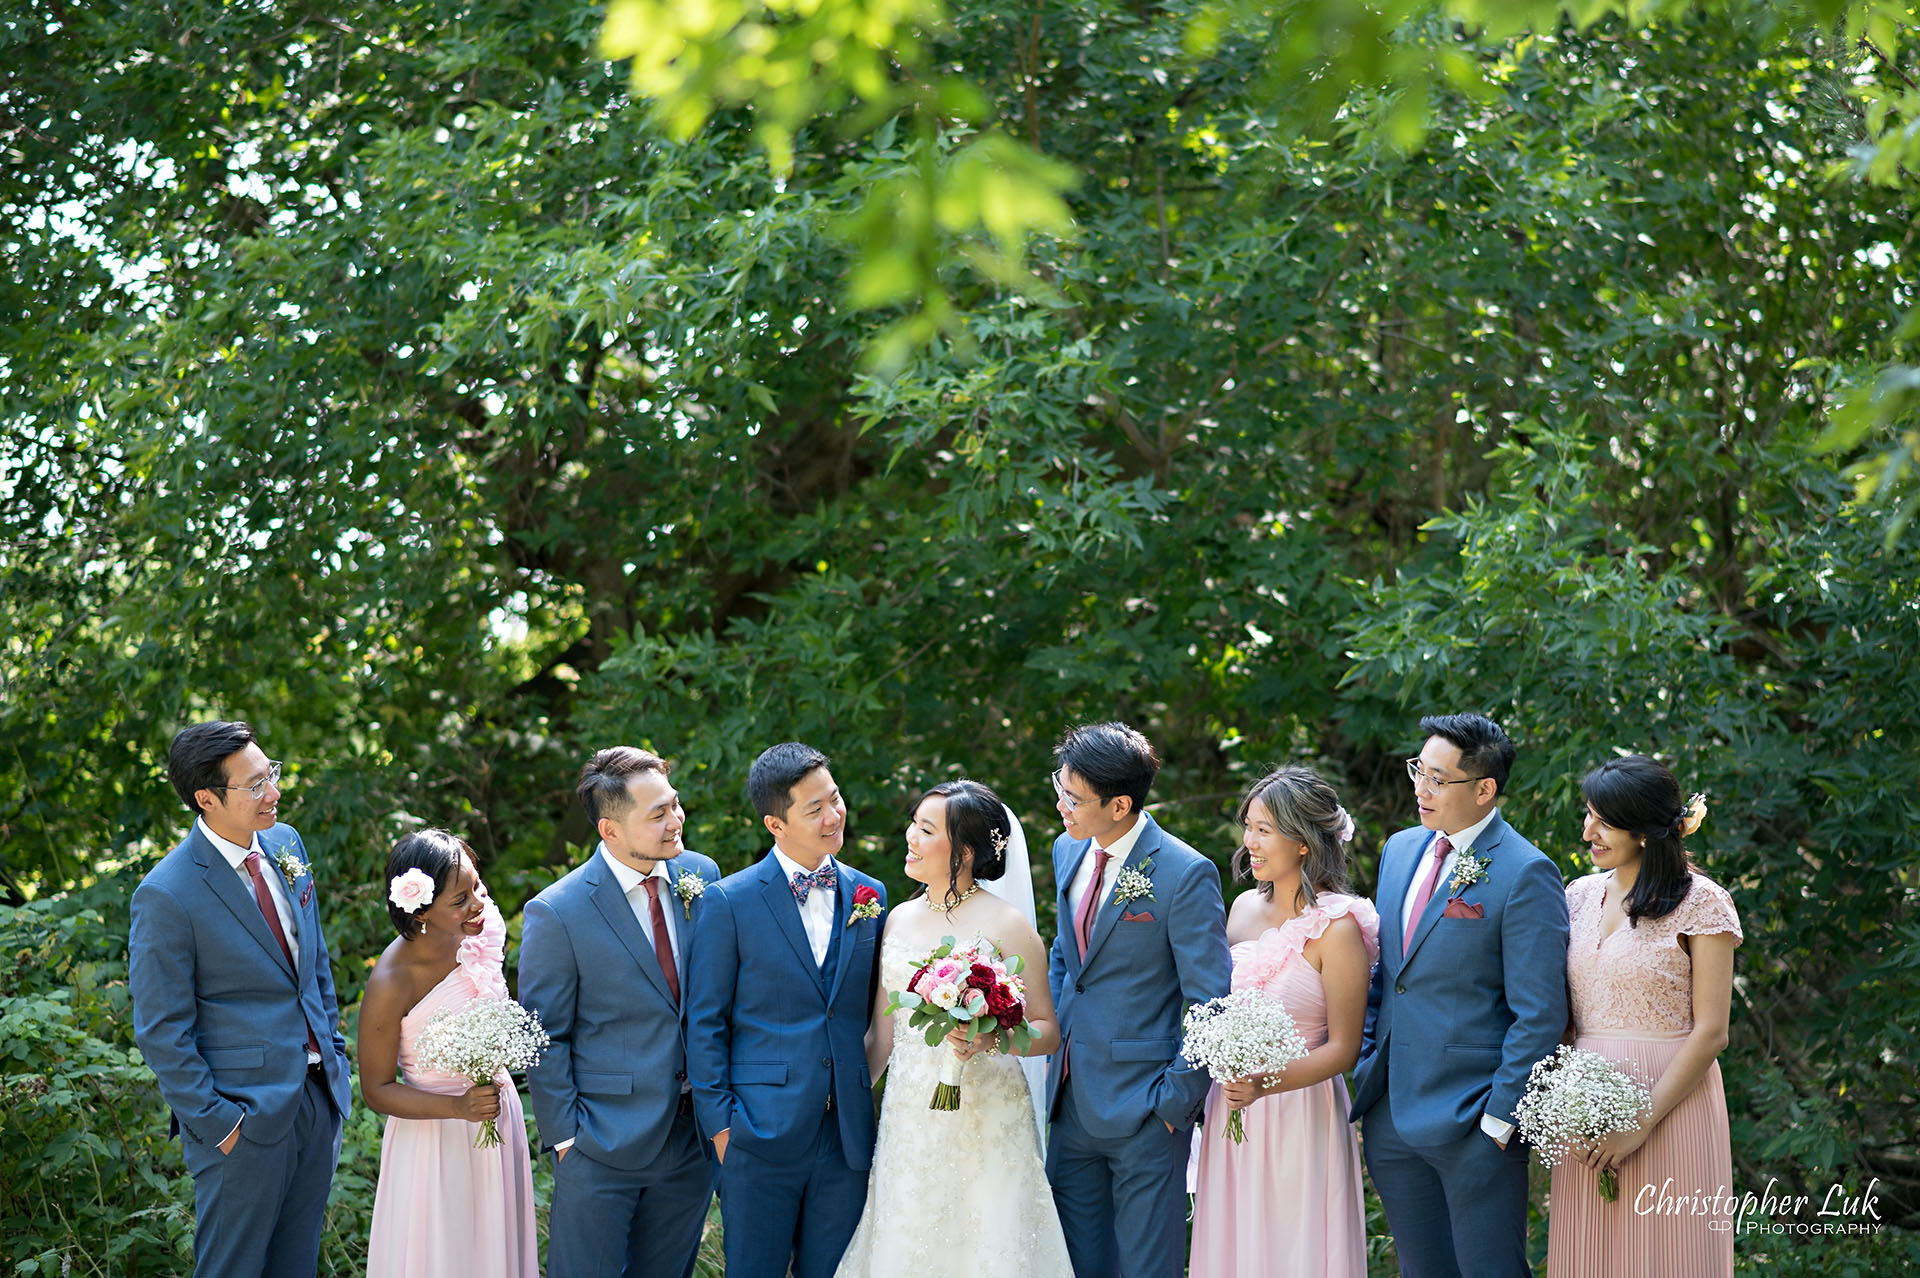 Christopher Luk Toronto Wedding Photographer Bridle Trail Baptist Church Unionville Main Street Crystal Fountain Event Venue Bride Groom Natural Photojournalistic Candid Creative Portrait Session Pictures Bridal Party Best Man Groomsmen Maid of Honour Bridesmaids Forest Landscape 